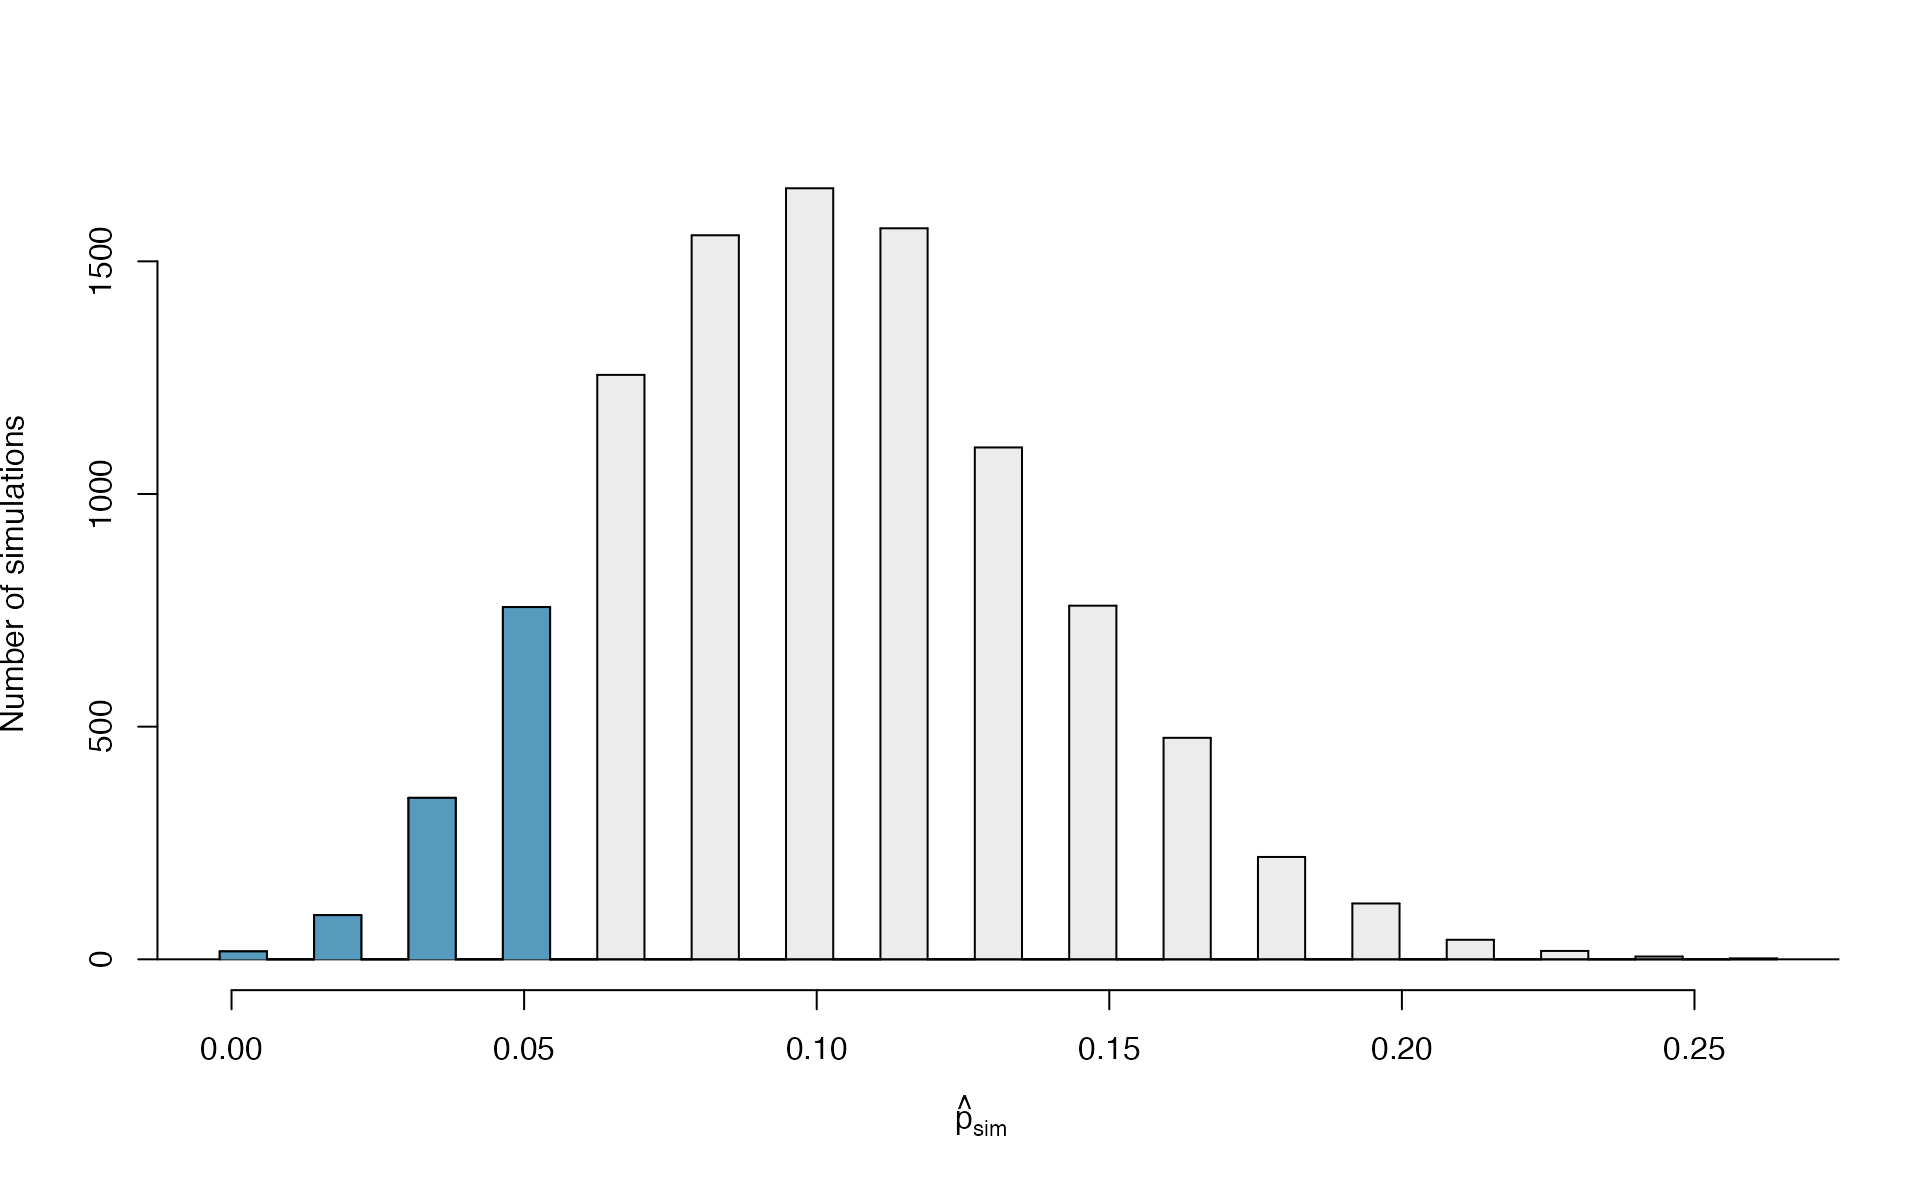 The null distribution for $\hat{p}$, created from 10,000 simulated studies. 